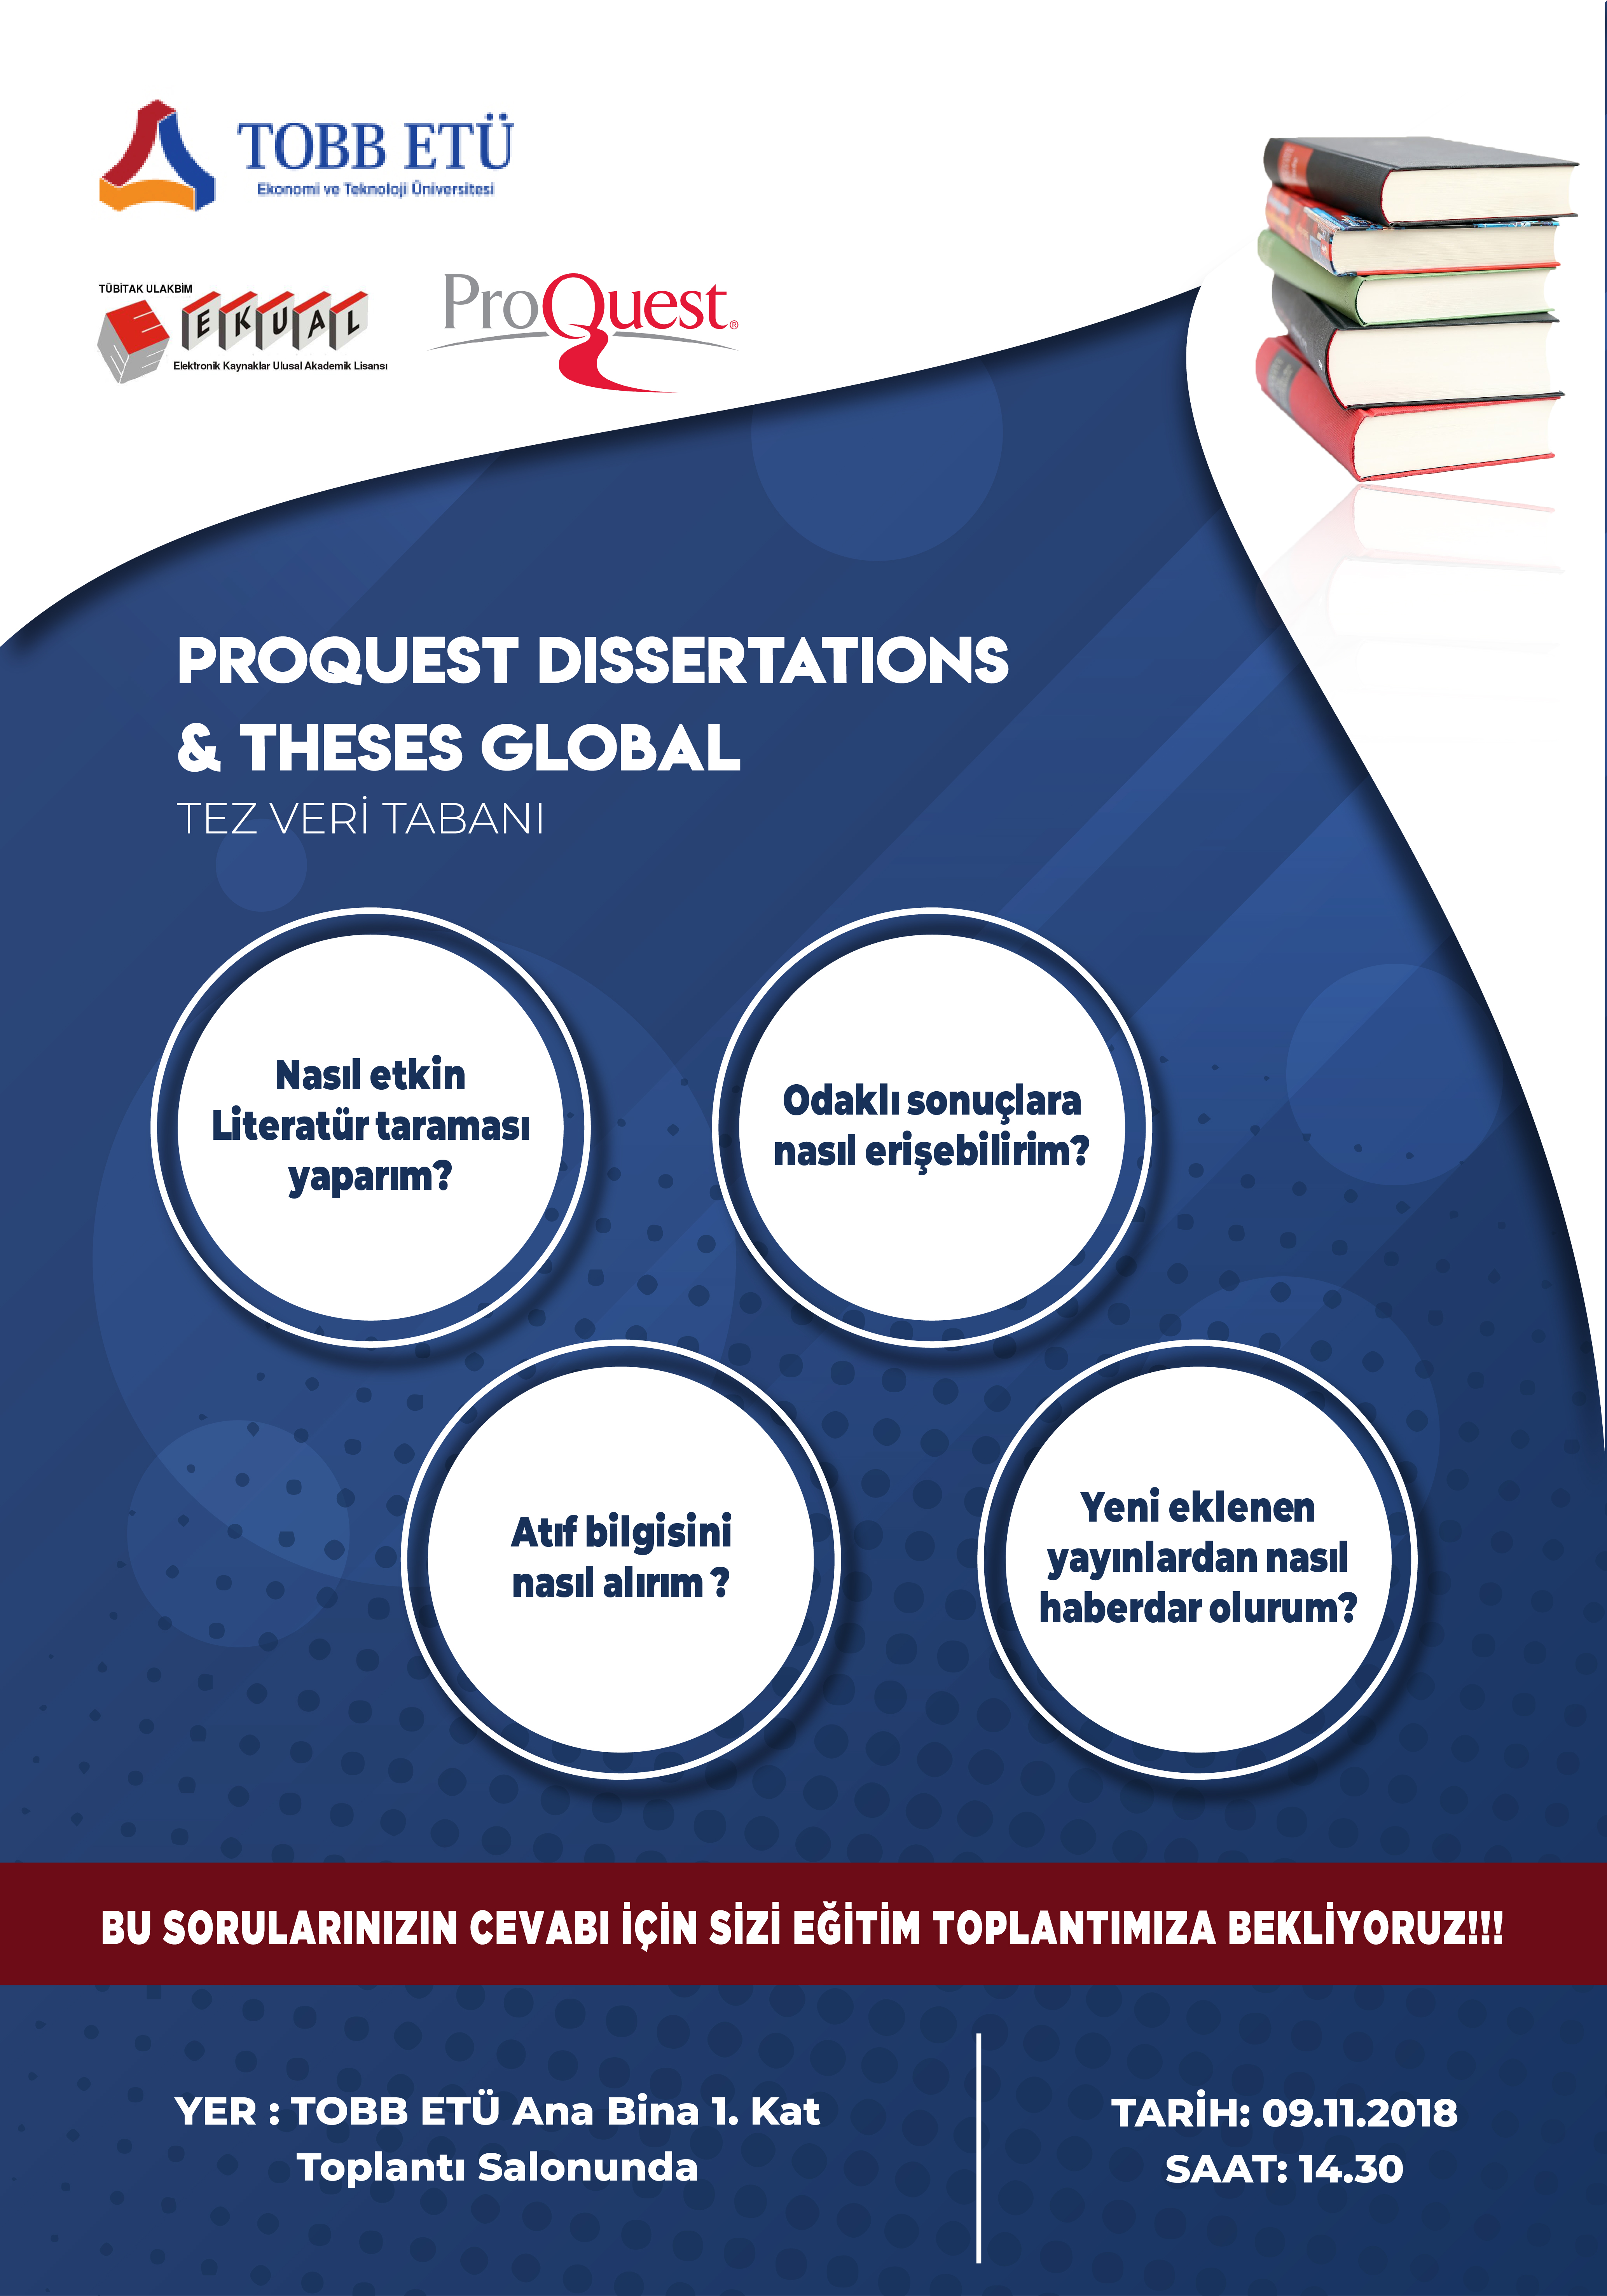 proquest dissertations & theses (pqdt) global